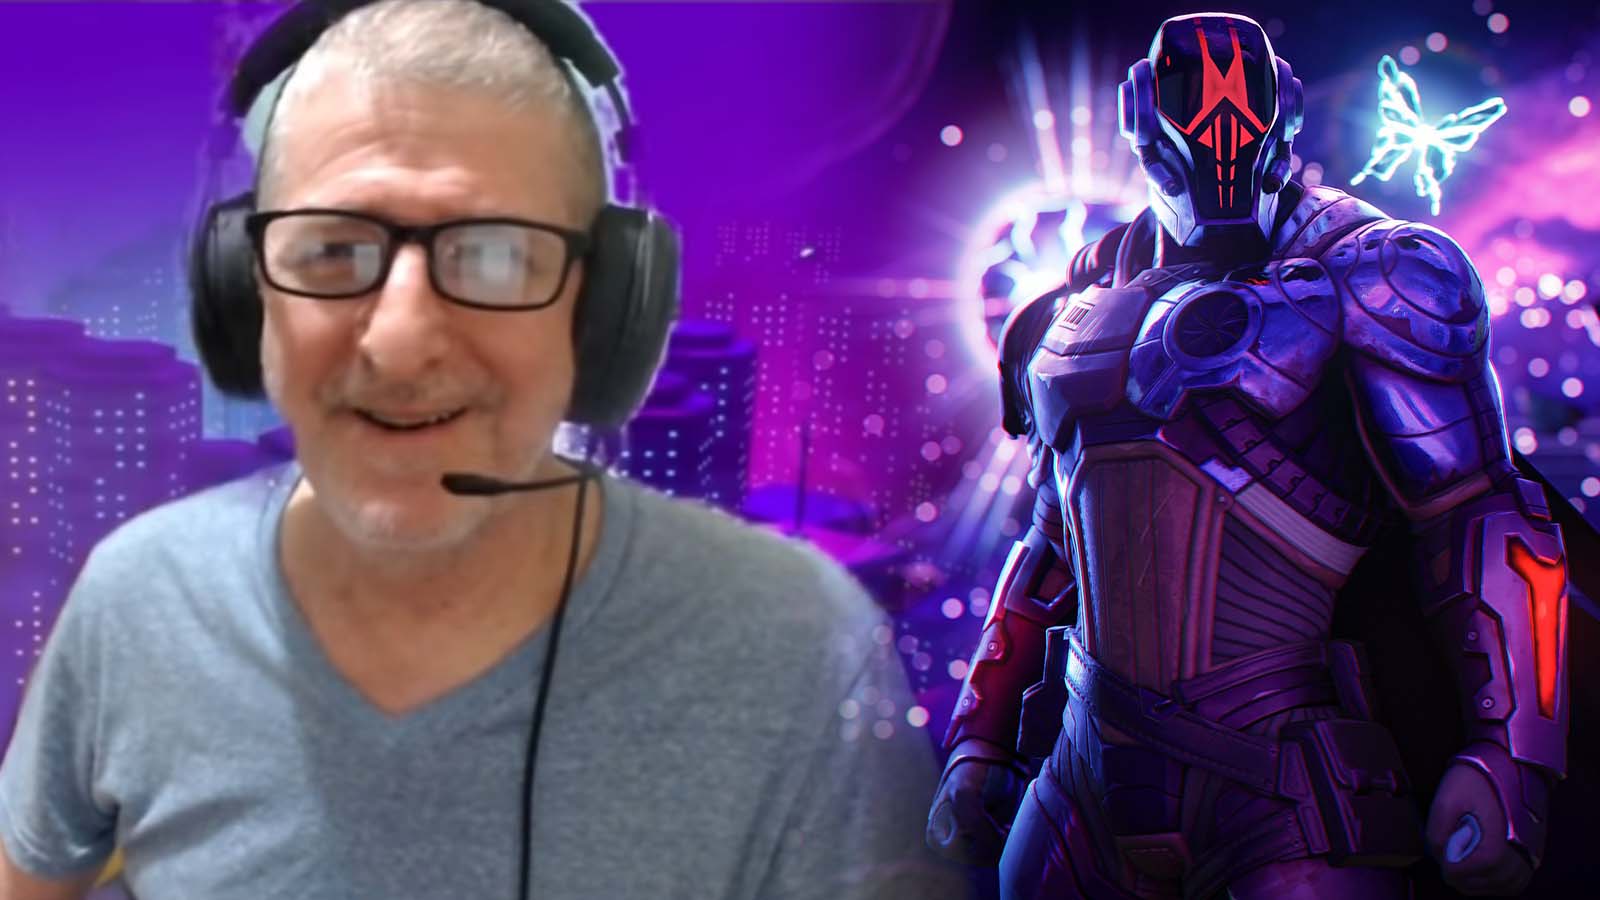 Viral TikTok launches 66 year old Fortnite creator to 200k YouTube subs overnight 